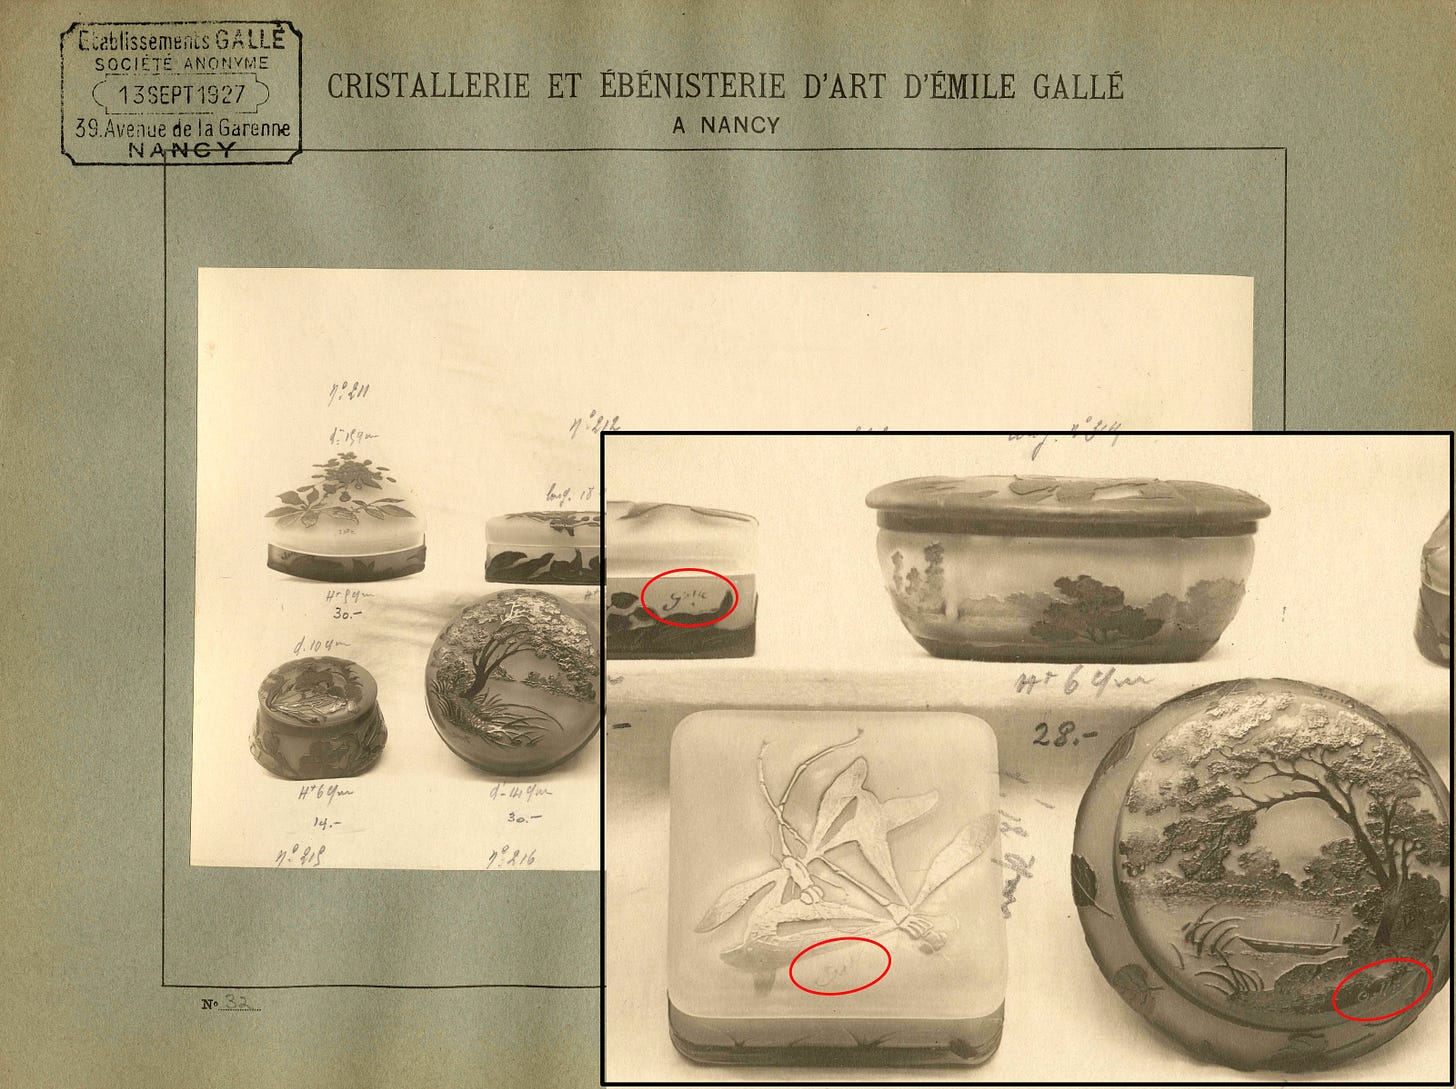 Gallé sales album from the Rakow library : close-up of the plate 27 showing the Mk IV signature on 3 candy boxes. ©Rakow LIbrary, Corning Museum of Glass.